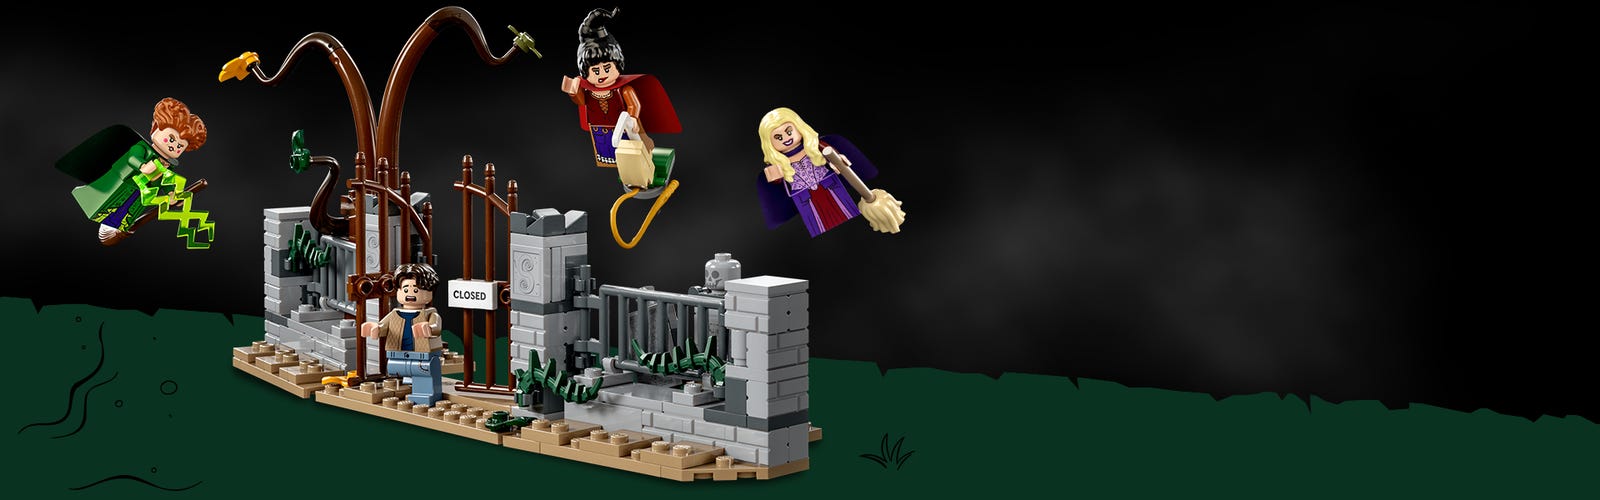 LEGO brick-built scene of a graveyard from the film Hocus Pocus with character minifigures flying above it